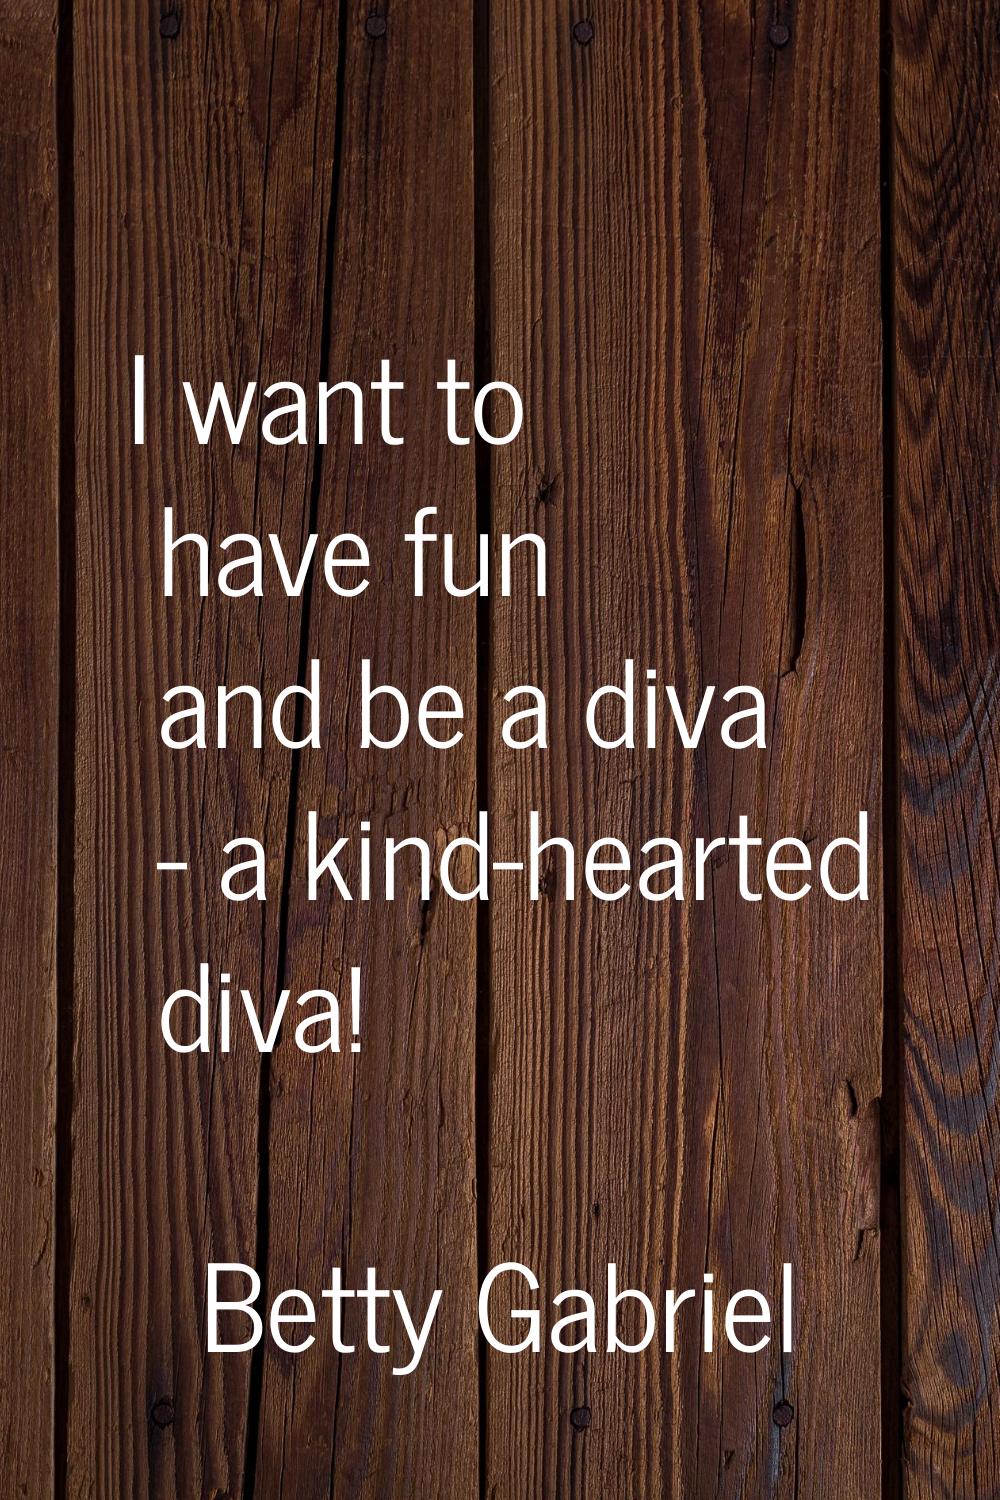 I want to have fun and be a diva - a kind-hearted diva!